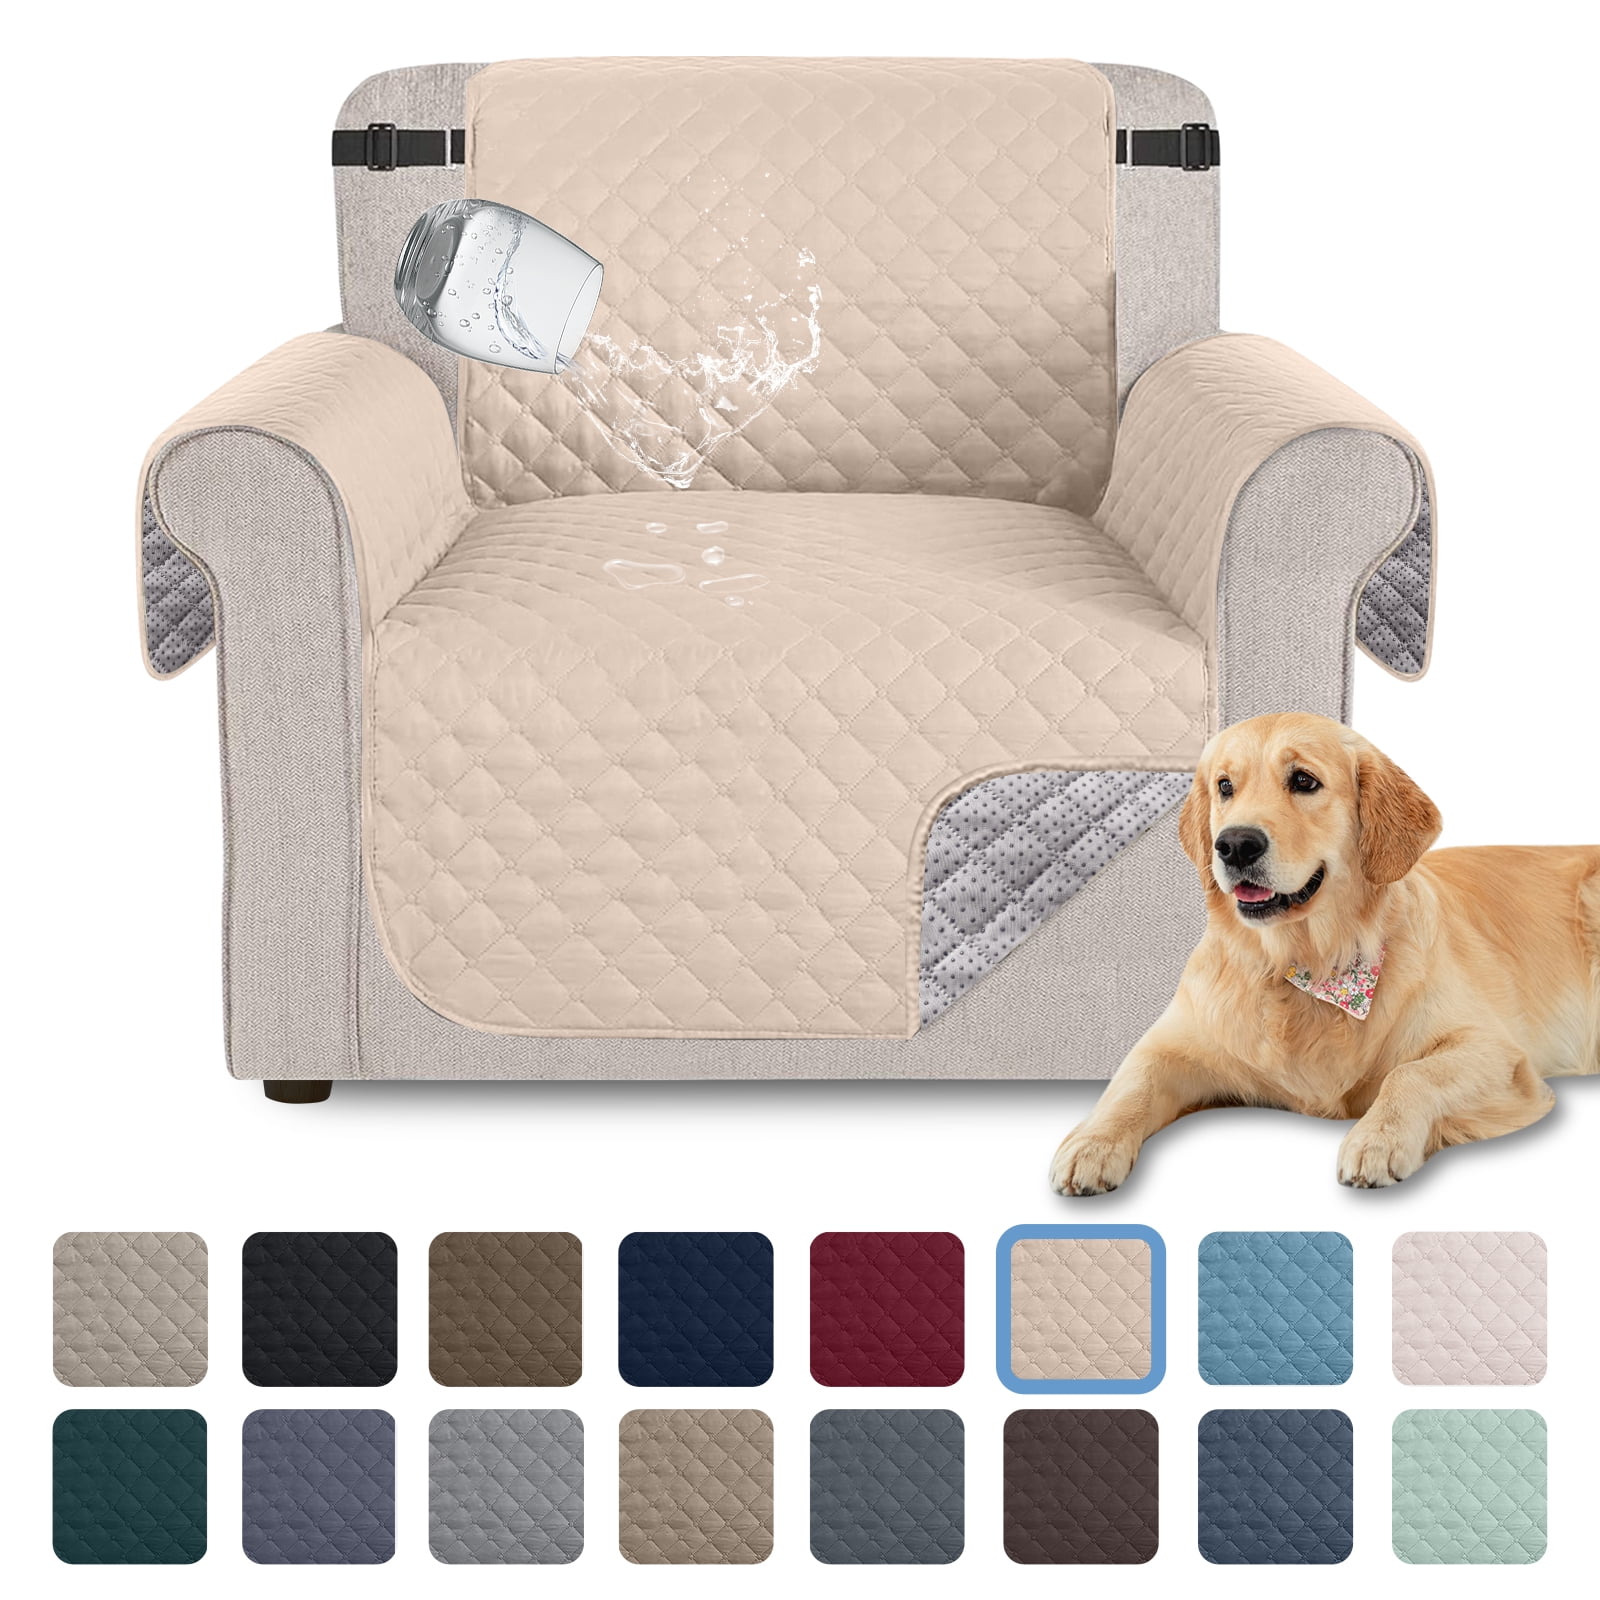 Waterproof Pu Leather Sofa Cover Mat Anti-scratch Non-Slip Sofa Towel Kids  Dog Pet Pad for Living Room Soft Smooth Couch Covers